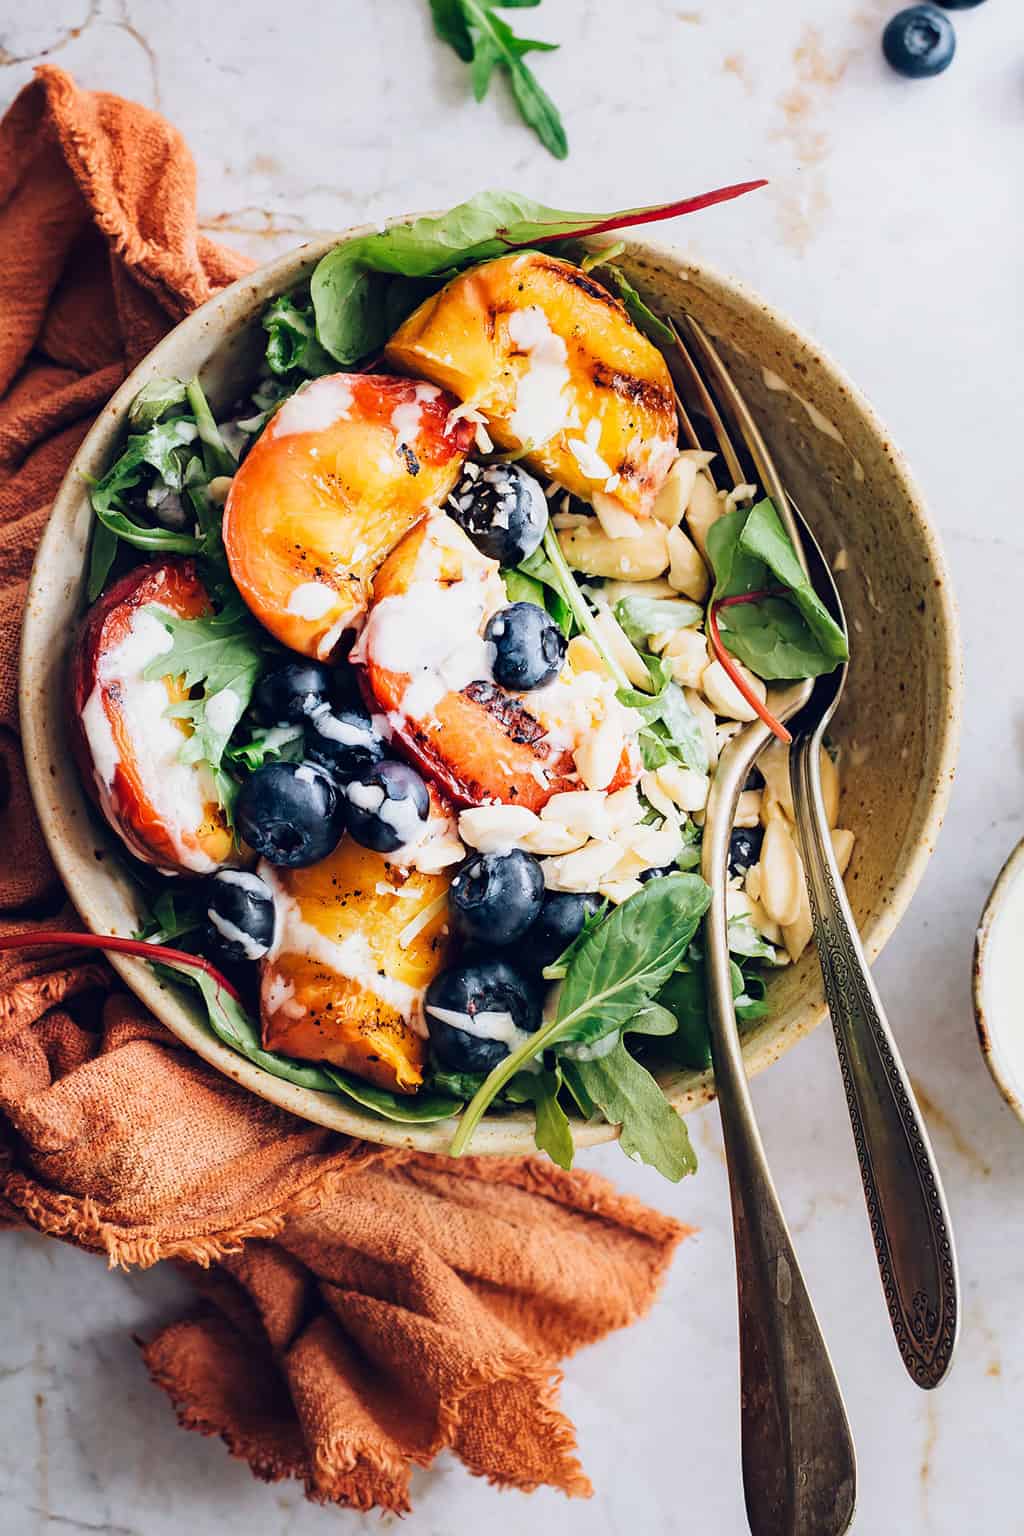 Grilled peach salad recipe from Hello Veggie